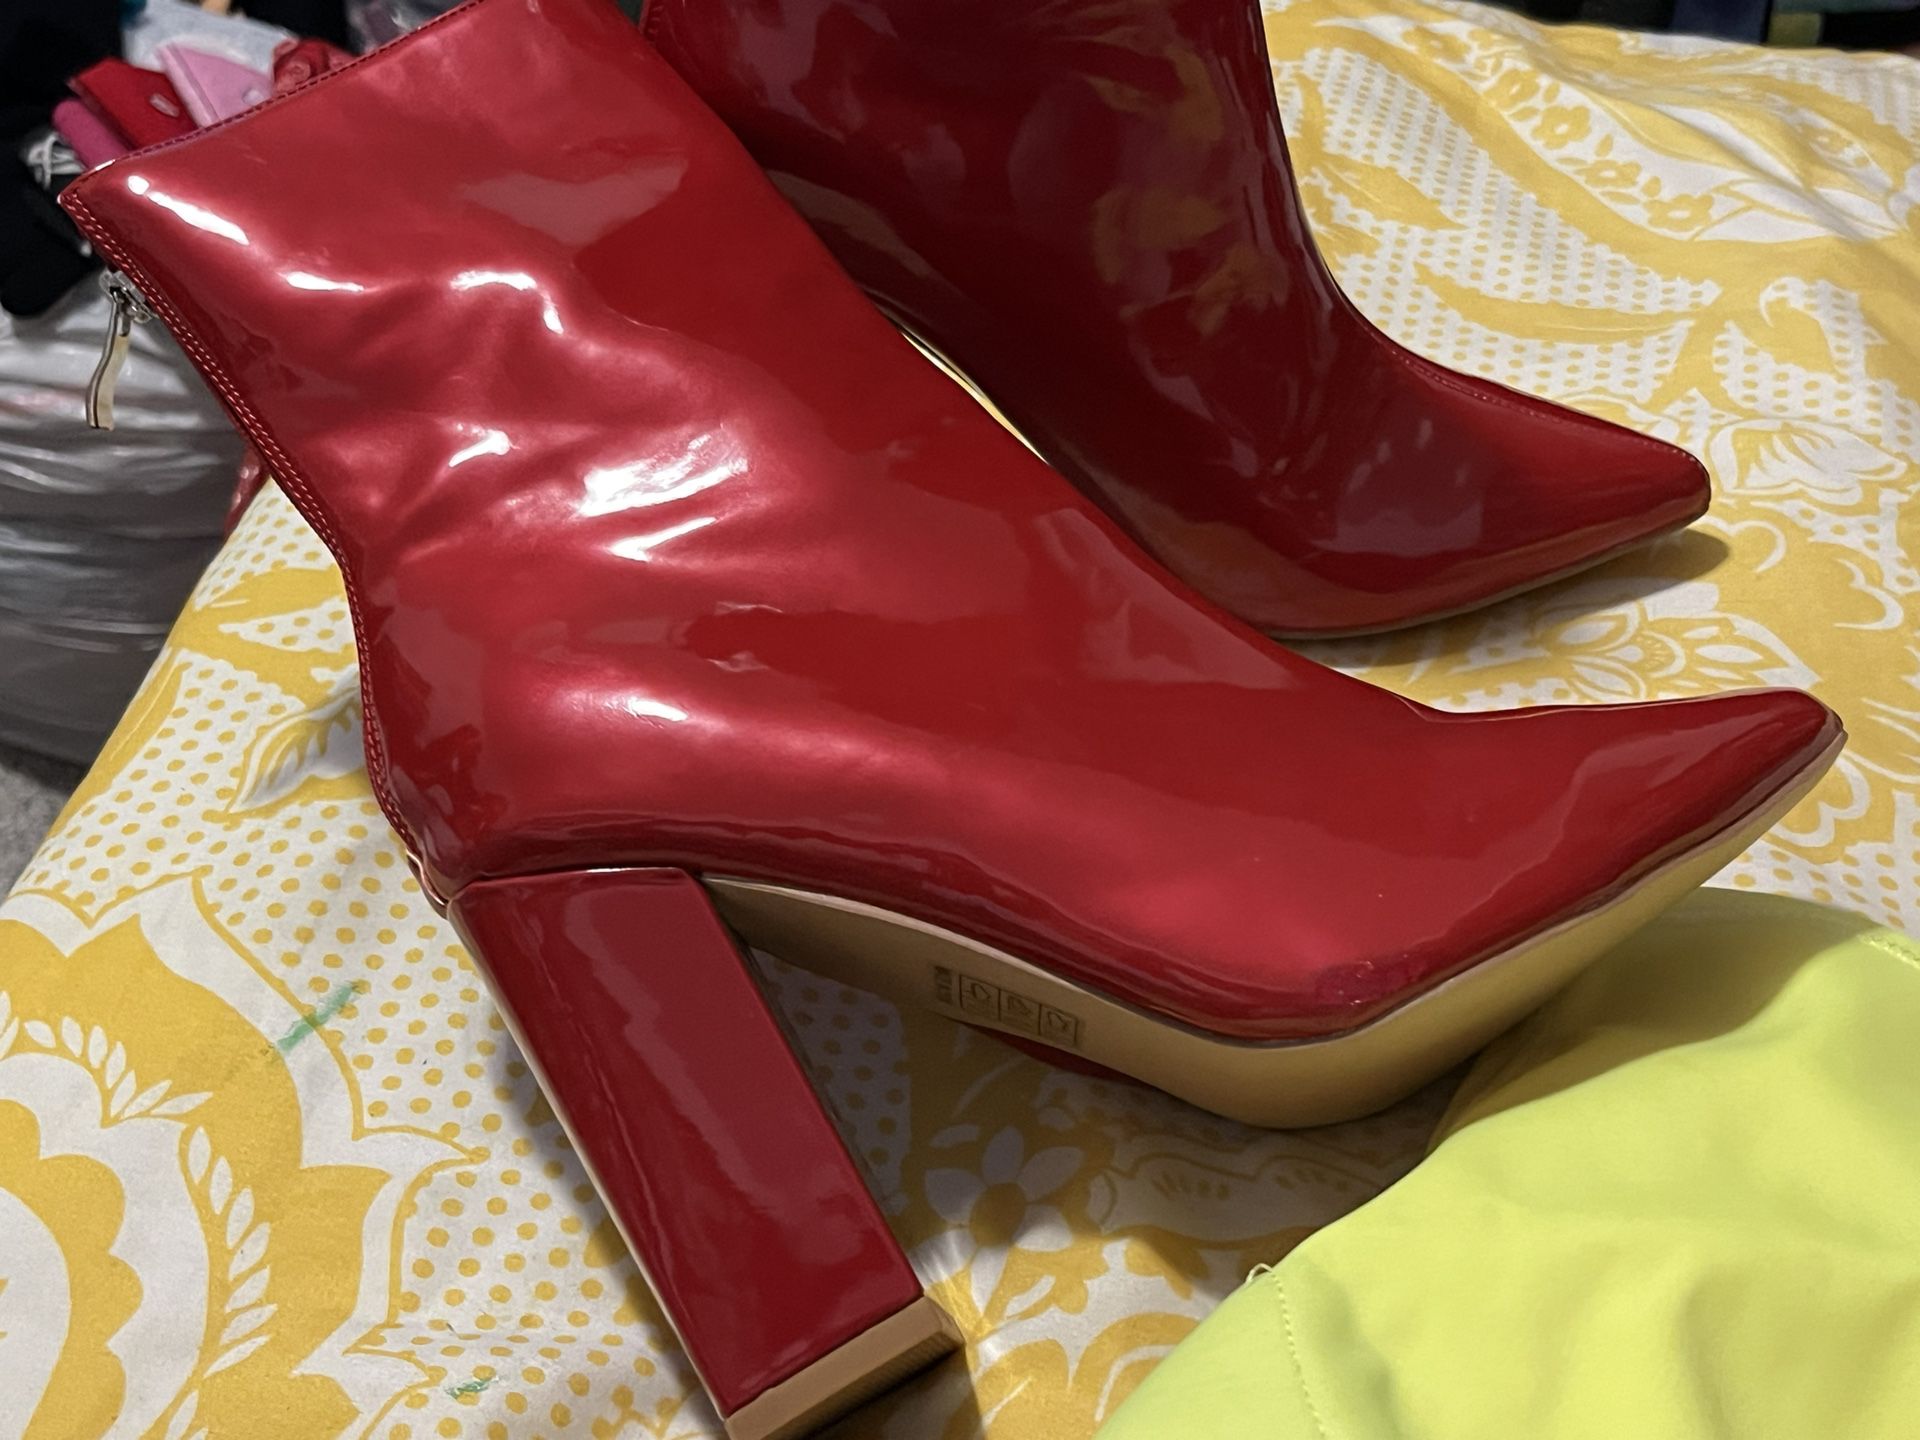 Red Boots patient Leather..Size 5...$65 Zipper in the back.. New!!) (Lime green hi heels boots size 7..$45 